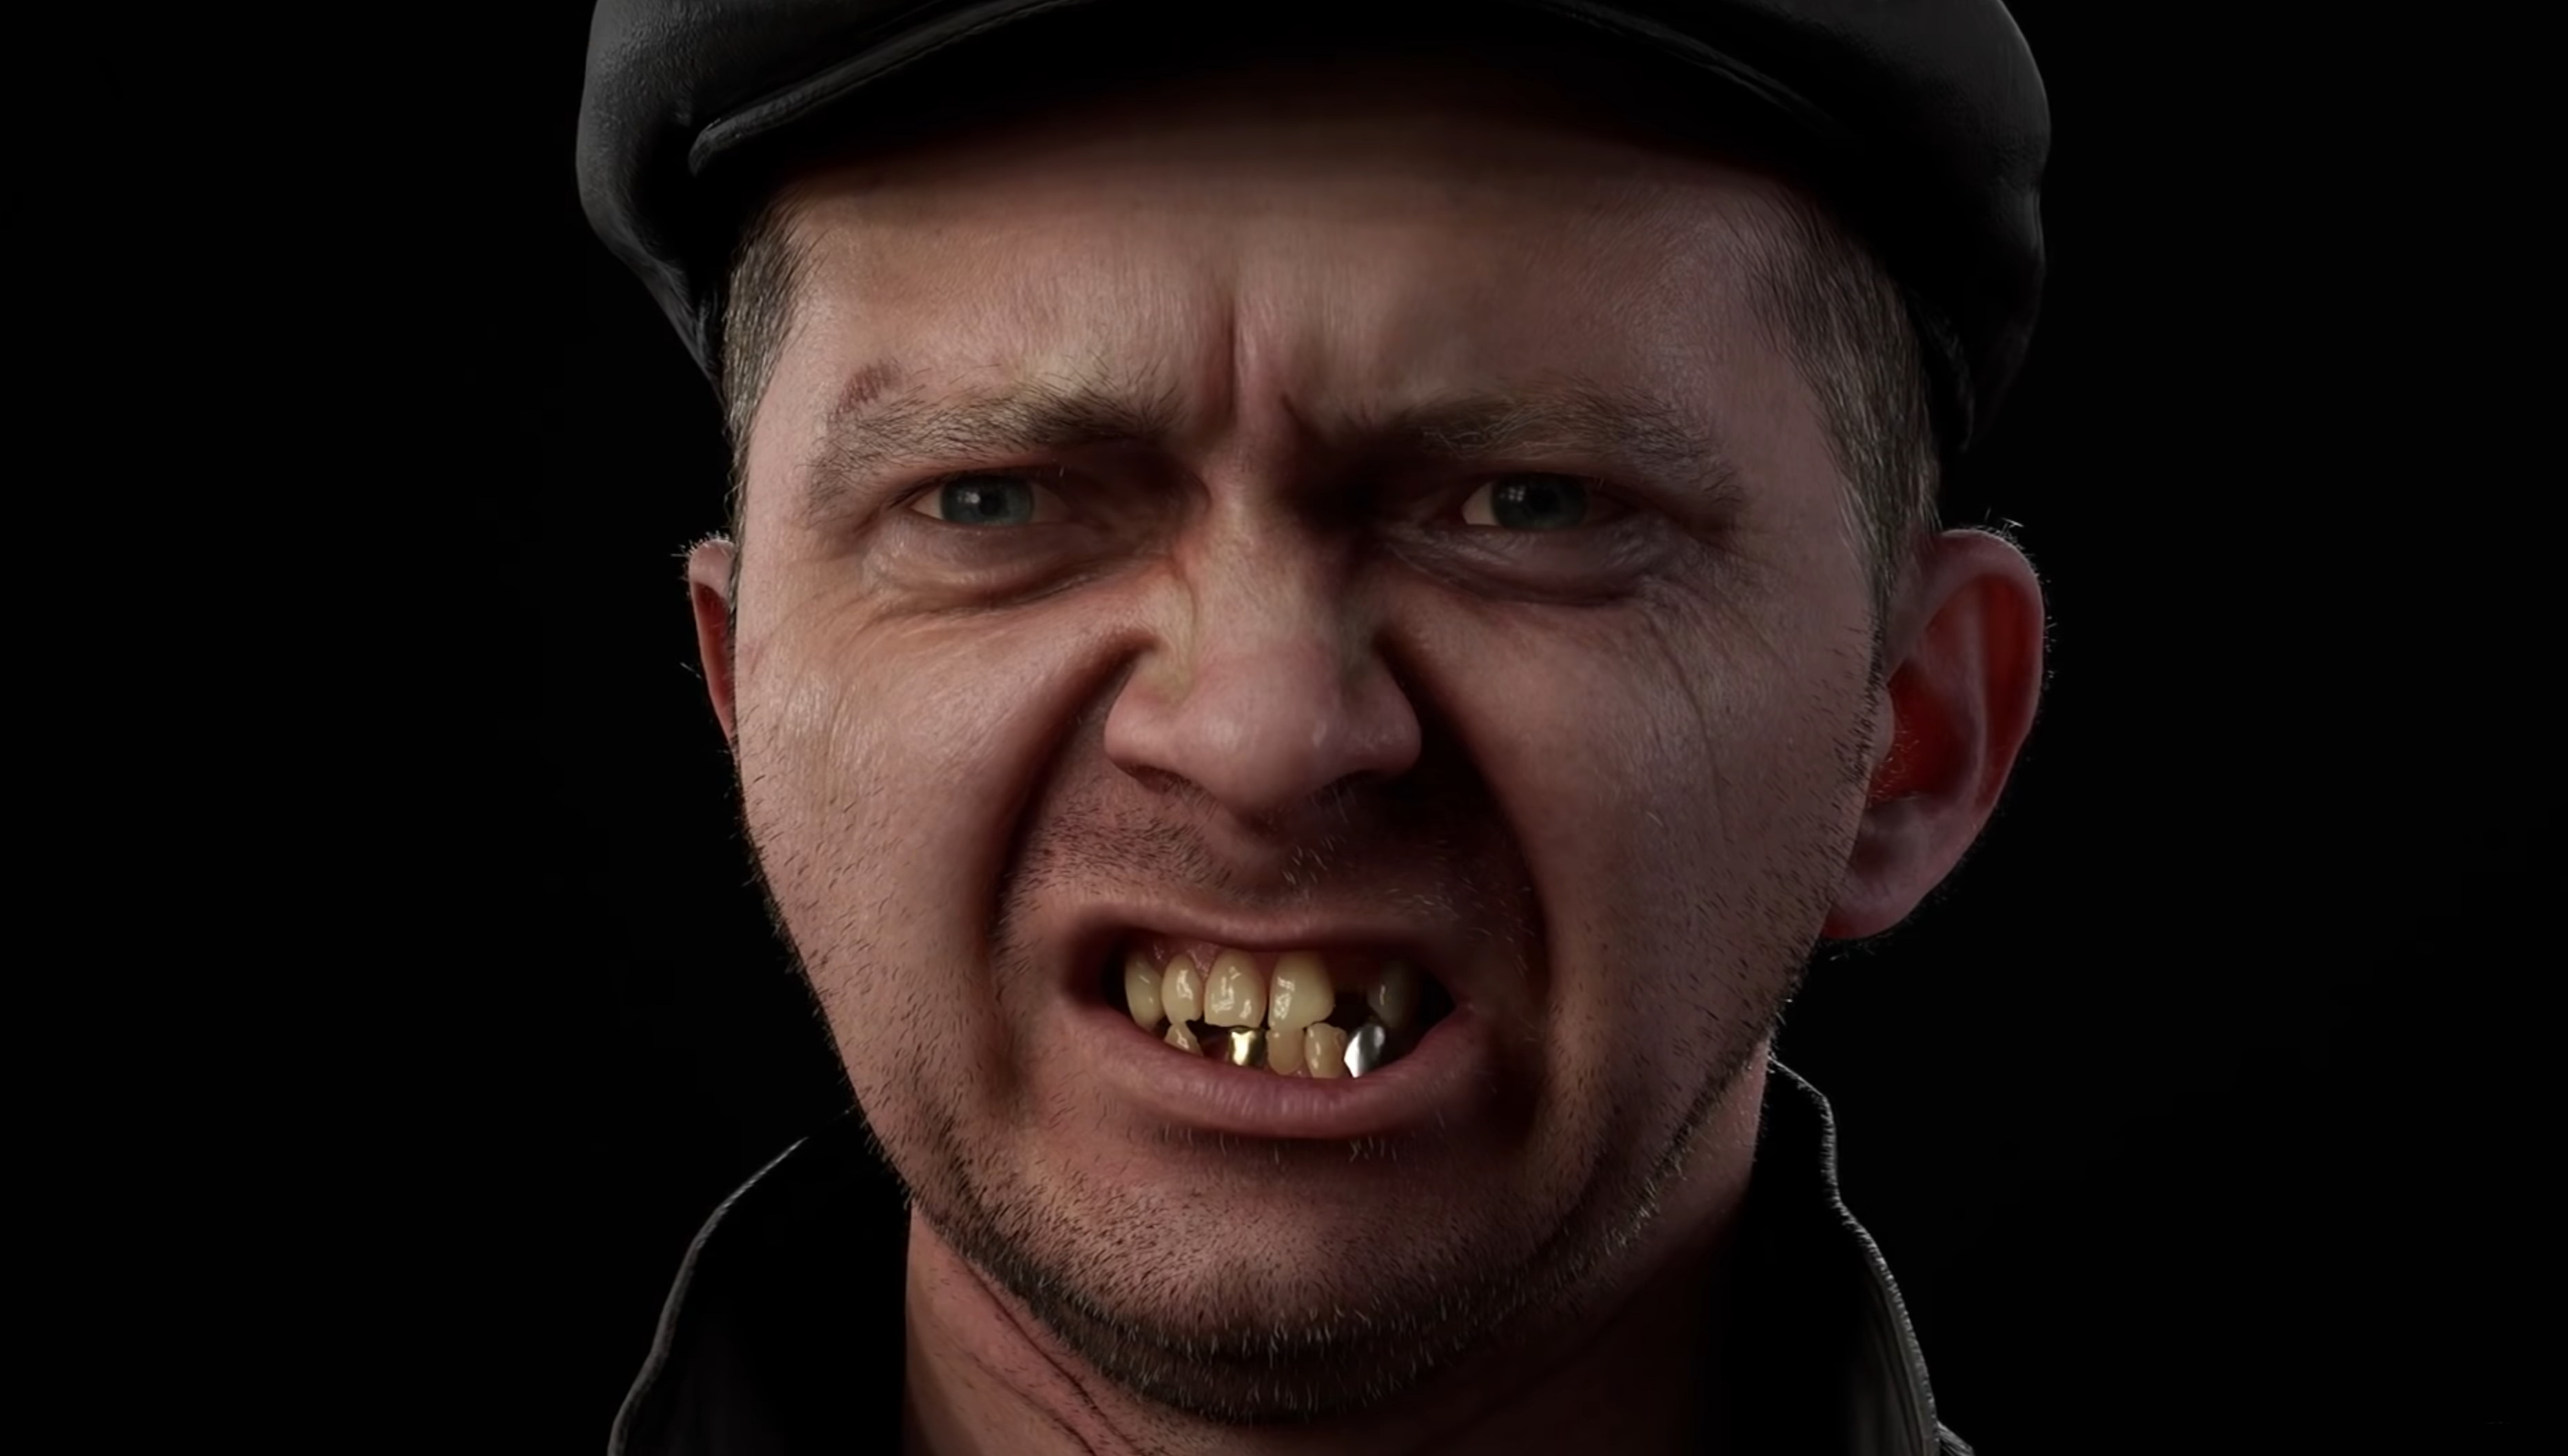 S.T.A.L.K.E.R. 2: The demonstration of the custom teeth tool, Unique in-game characters. 3730x2120 HD Background.